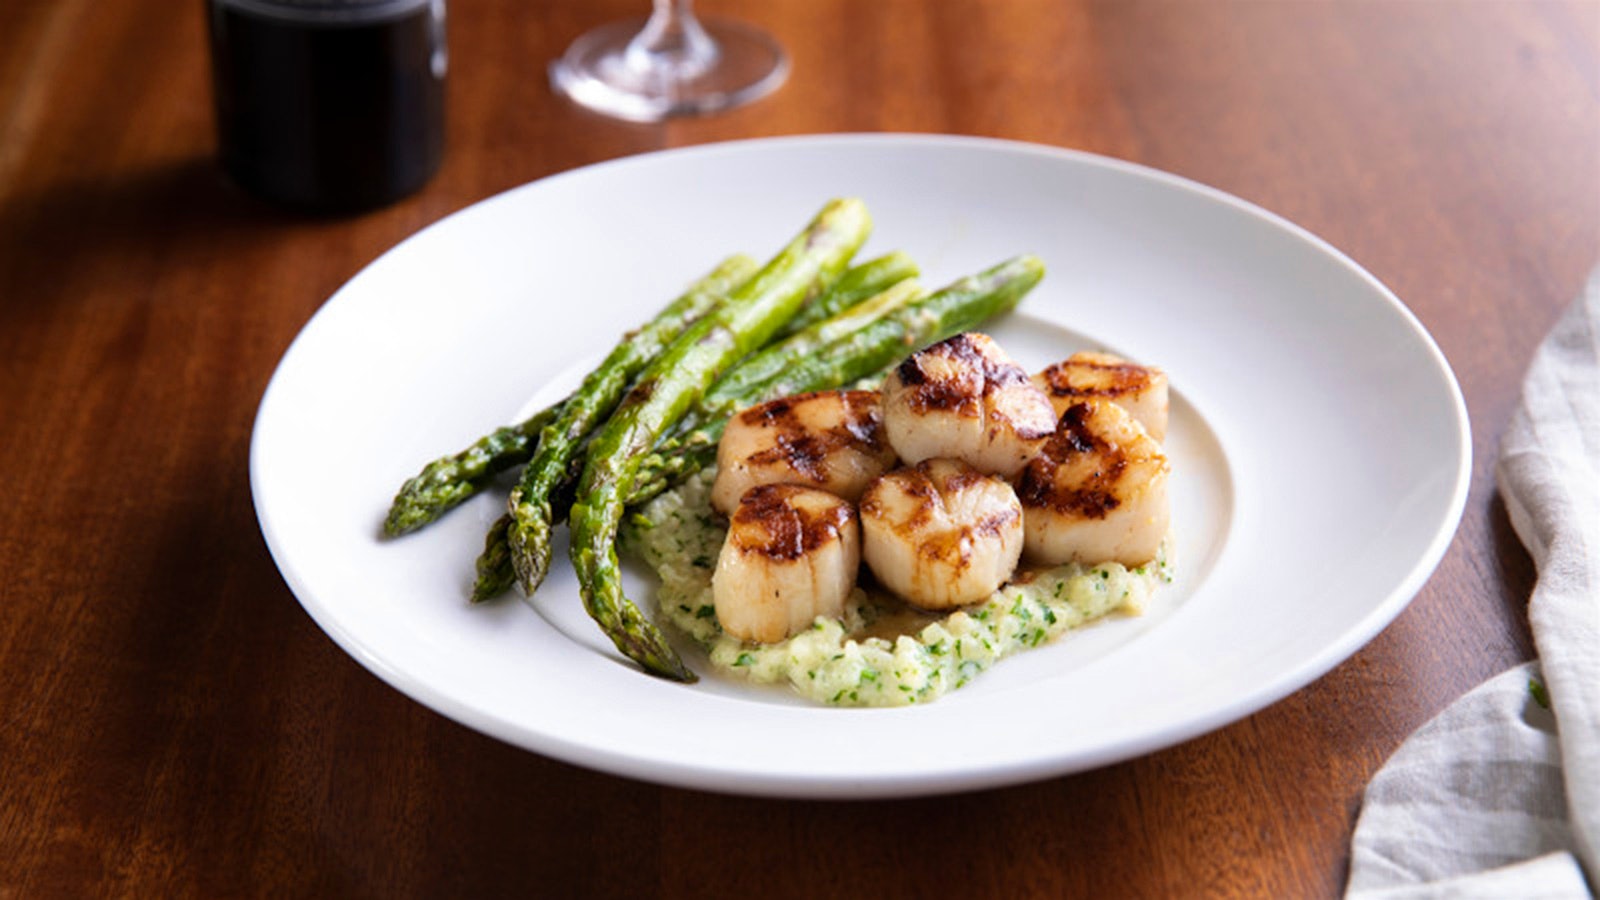     Plate of caramelized scallops with asparagus